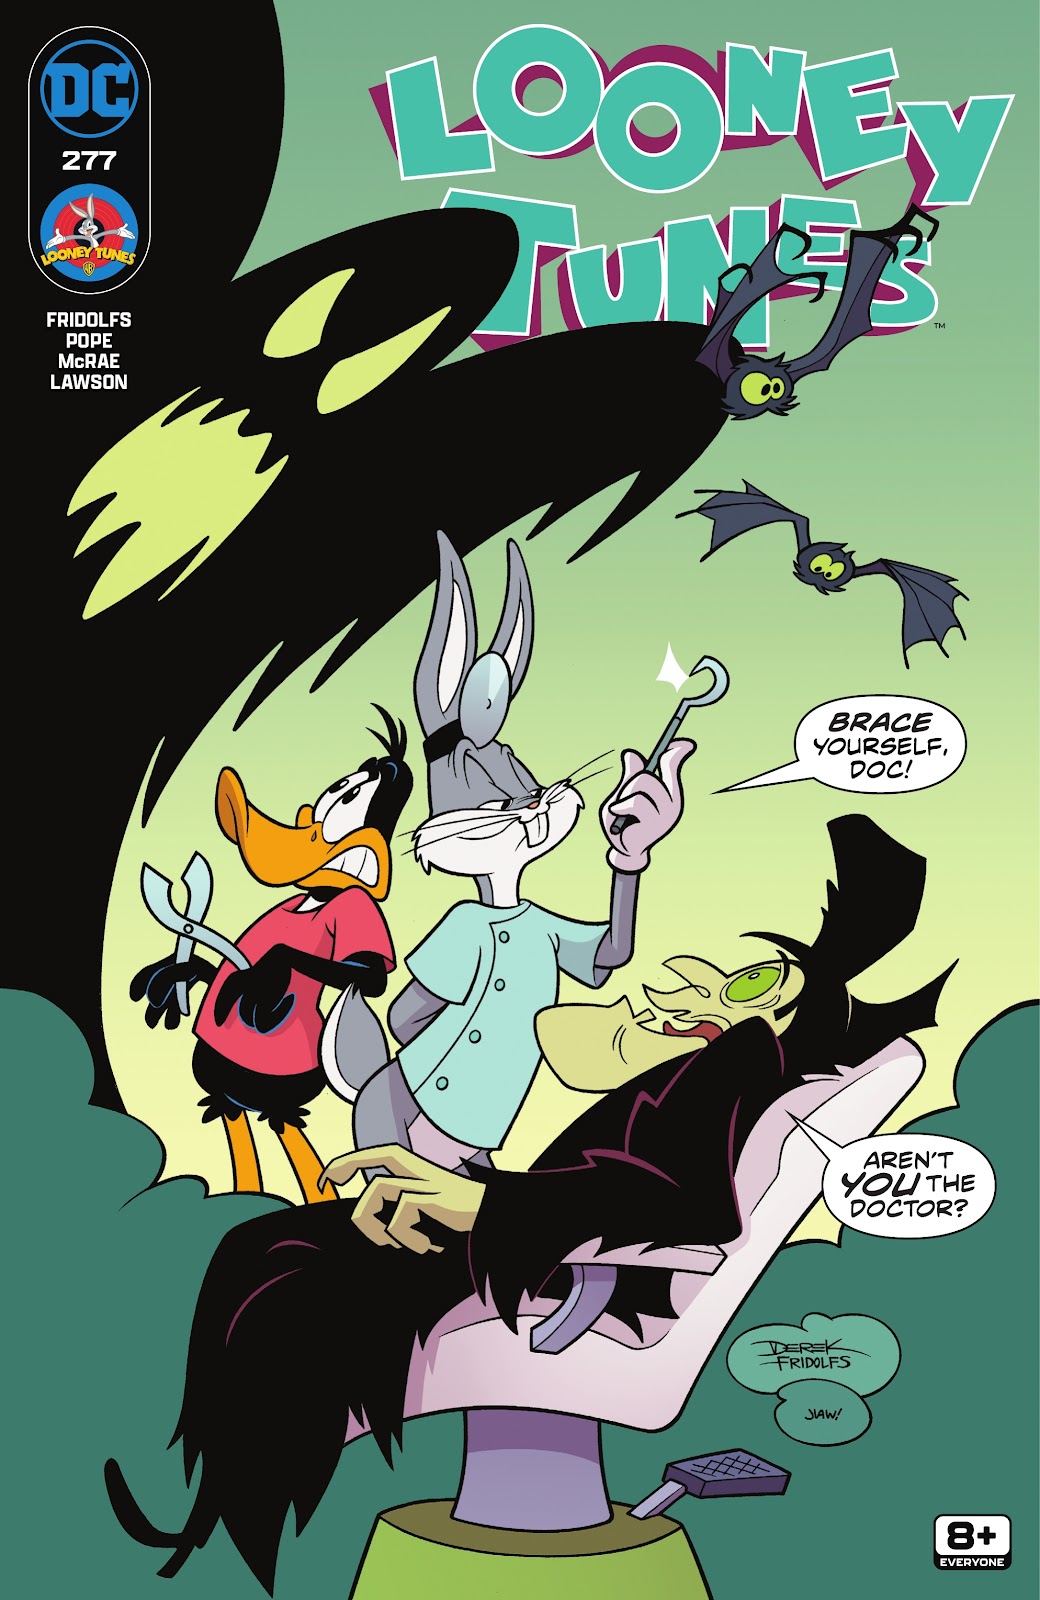 Looney Tunes (1994) issue 277 - Page 1